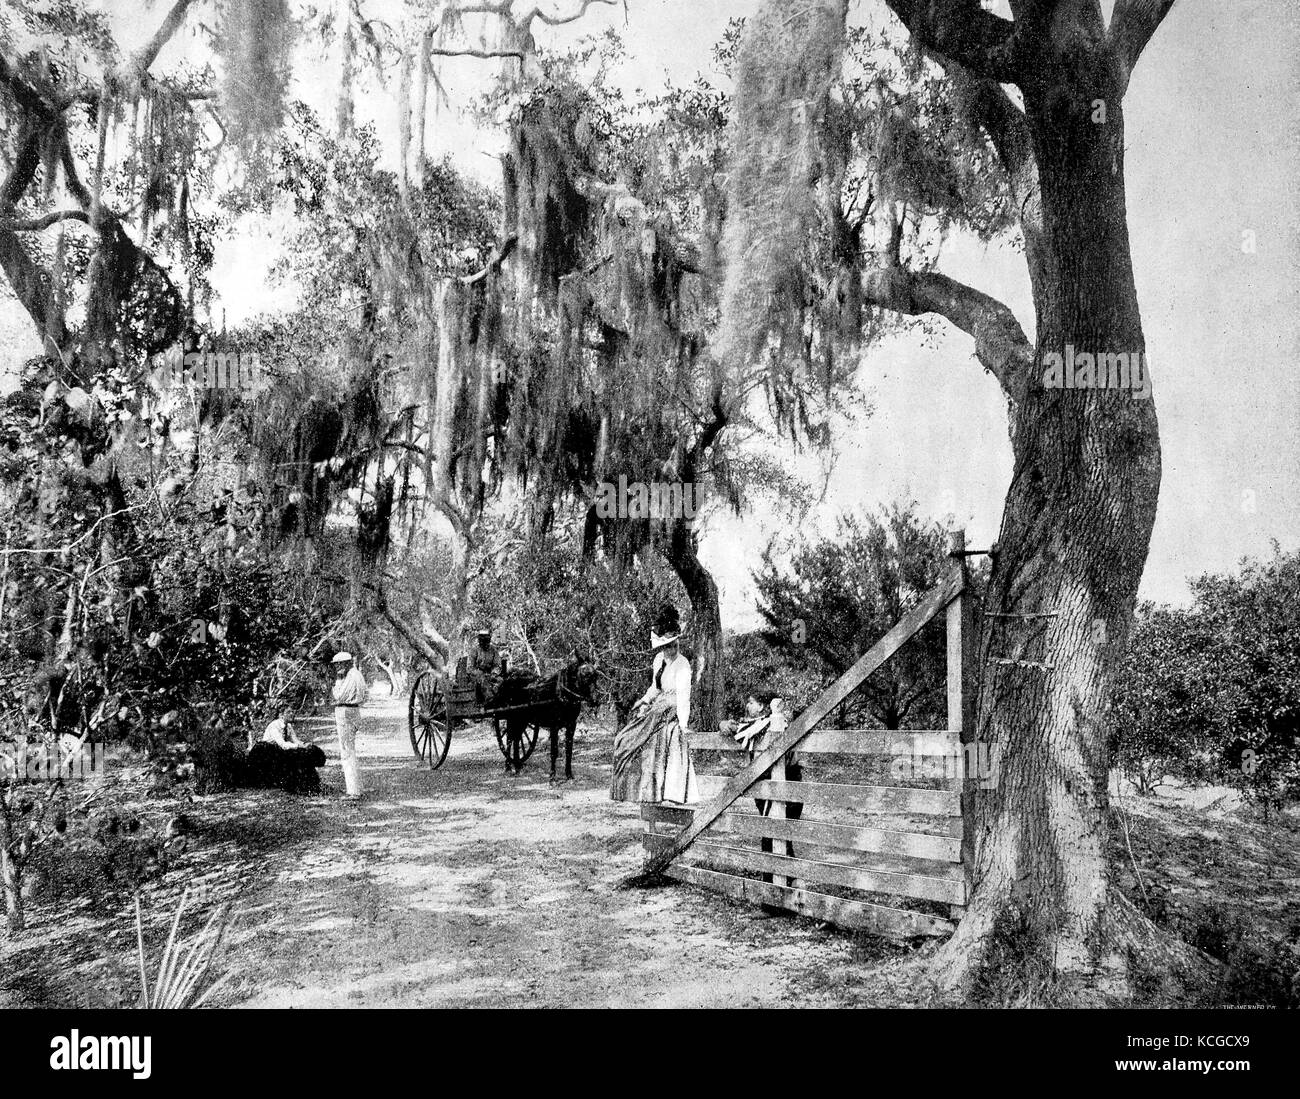 United States of America, landscape near the small town Ormond in the state of Florida, a very beautiful place with stones and snares at the branches, a horse-drawn carriage, men, woman and child at a gate, digital improved reproduction of a historical photo from the (estimated) year 1899 Stock Photo